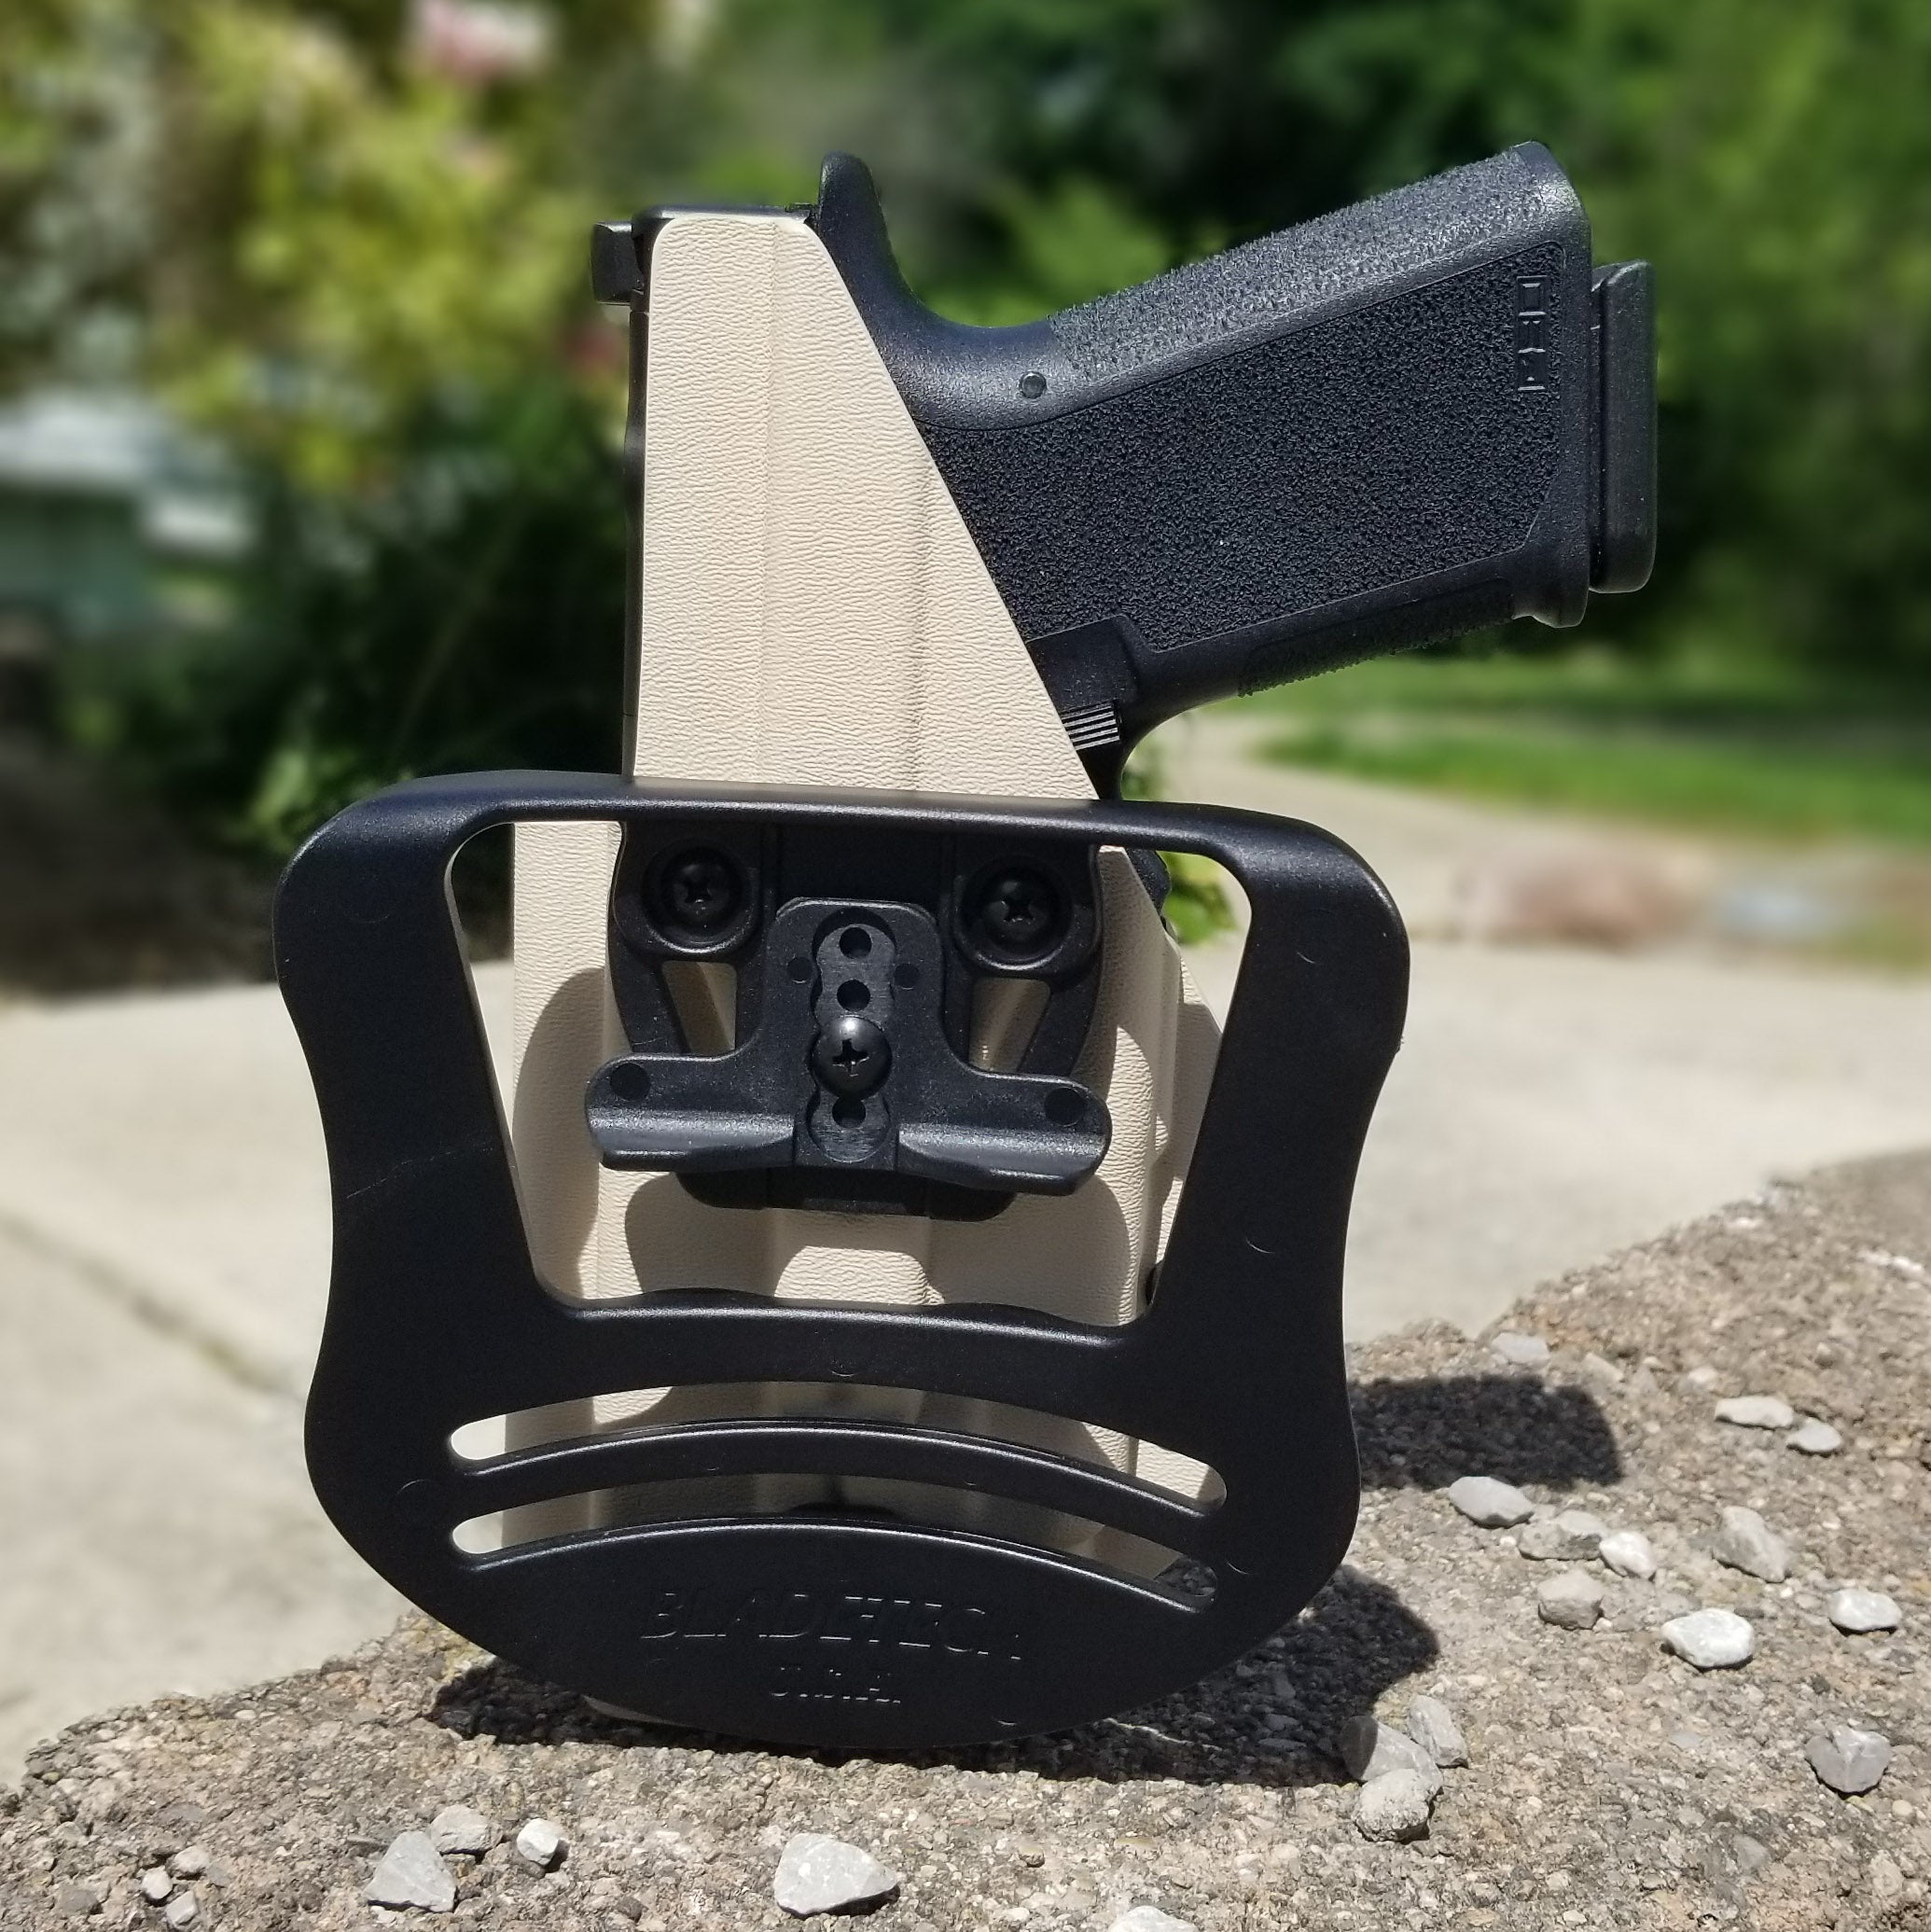 Outside waistband holster designed to fit the Polymer80 PF940 and PF940C pistols with Streamlight TLR-7 or TLR-7A Weapon mounted light. Holster will fit compact, standard and long slides. (Glock 19 & 17 slides) Open Muzzle for threaded barrel, full sweat guard, adjustable retention, minimal material, reduced printing